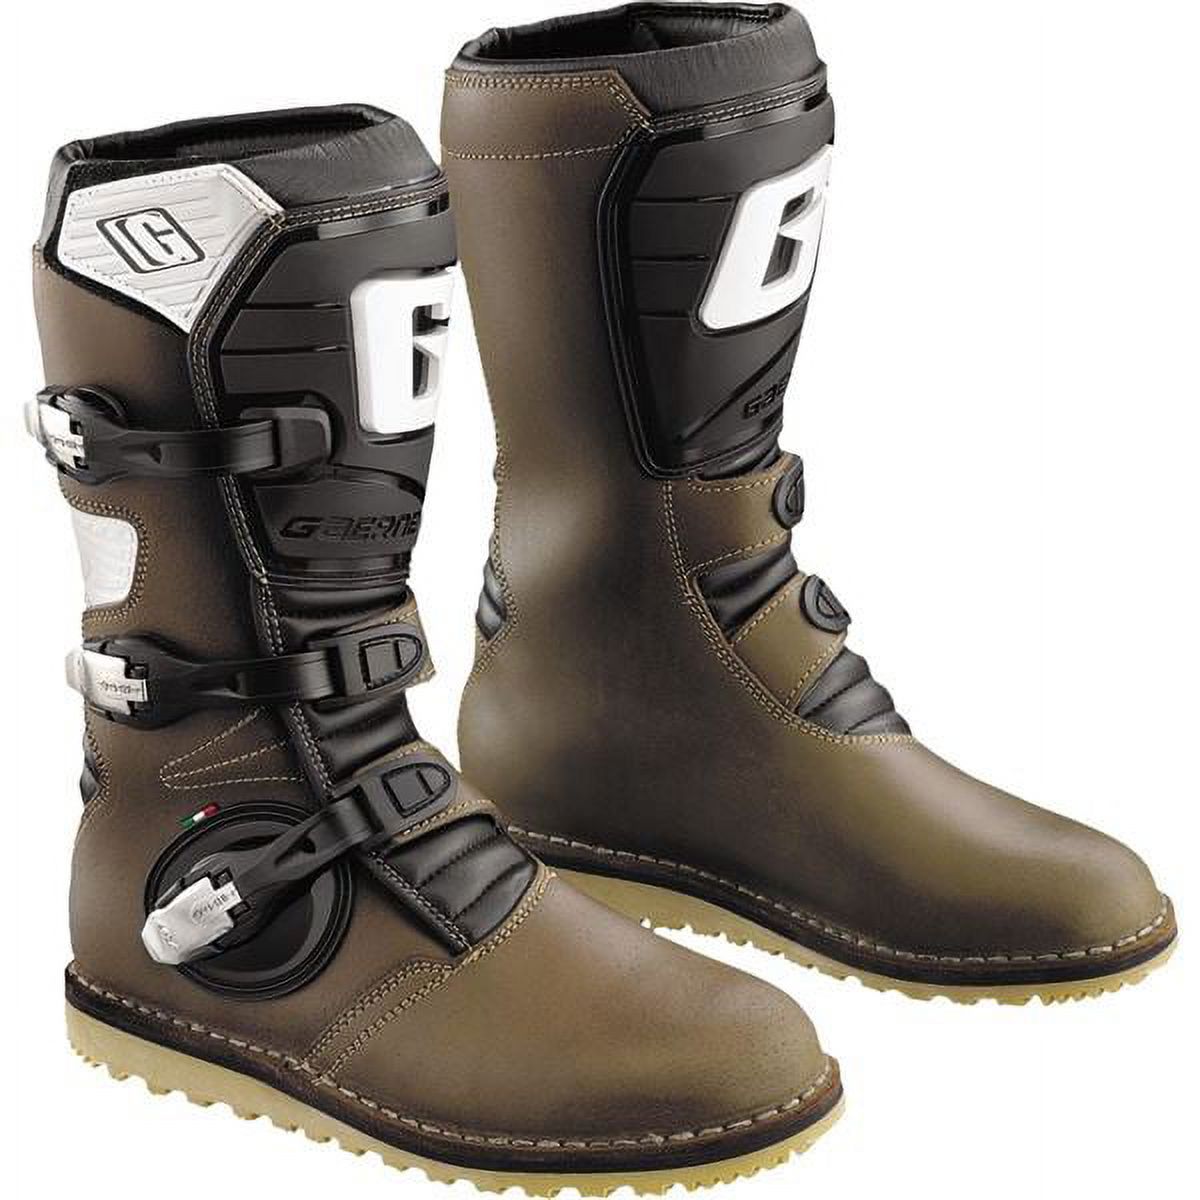 Gaerne Balance Pro-Tech Boots (8, Brown) - image 2 of 2